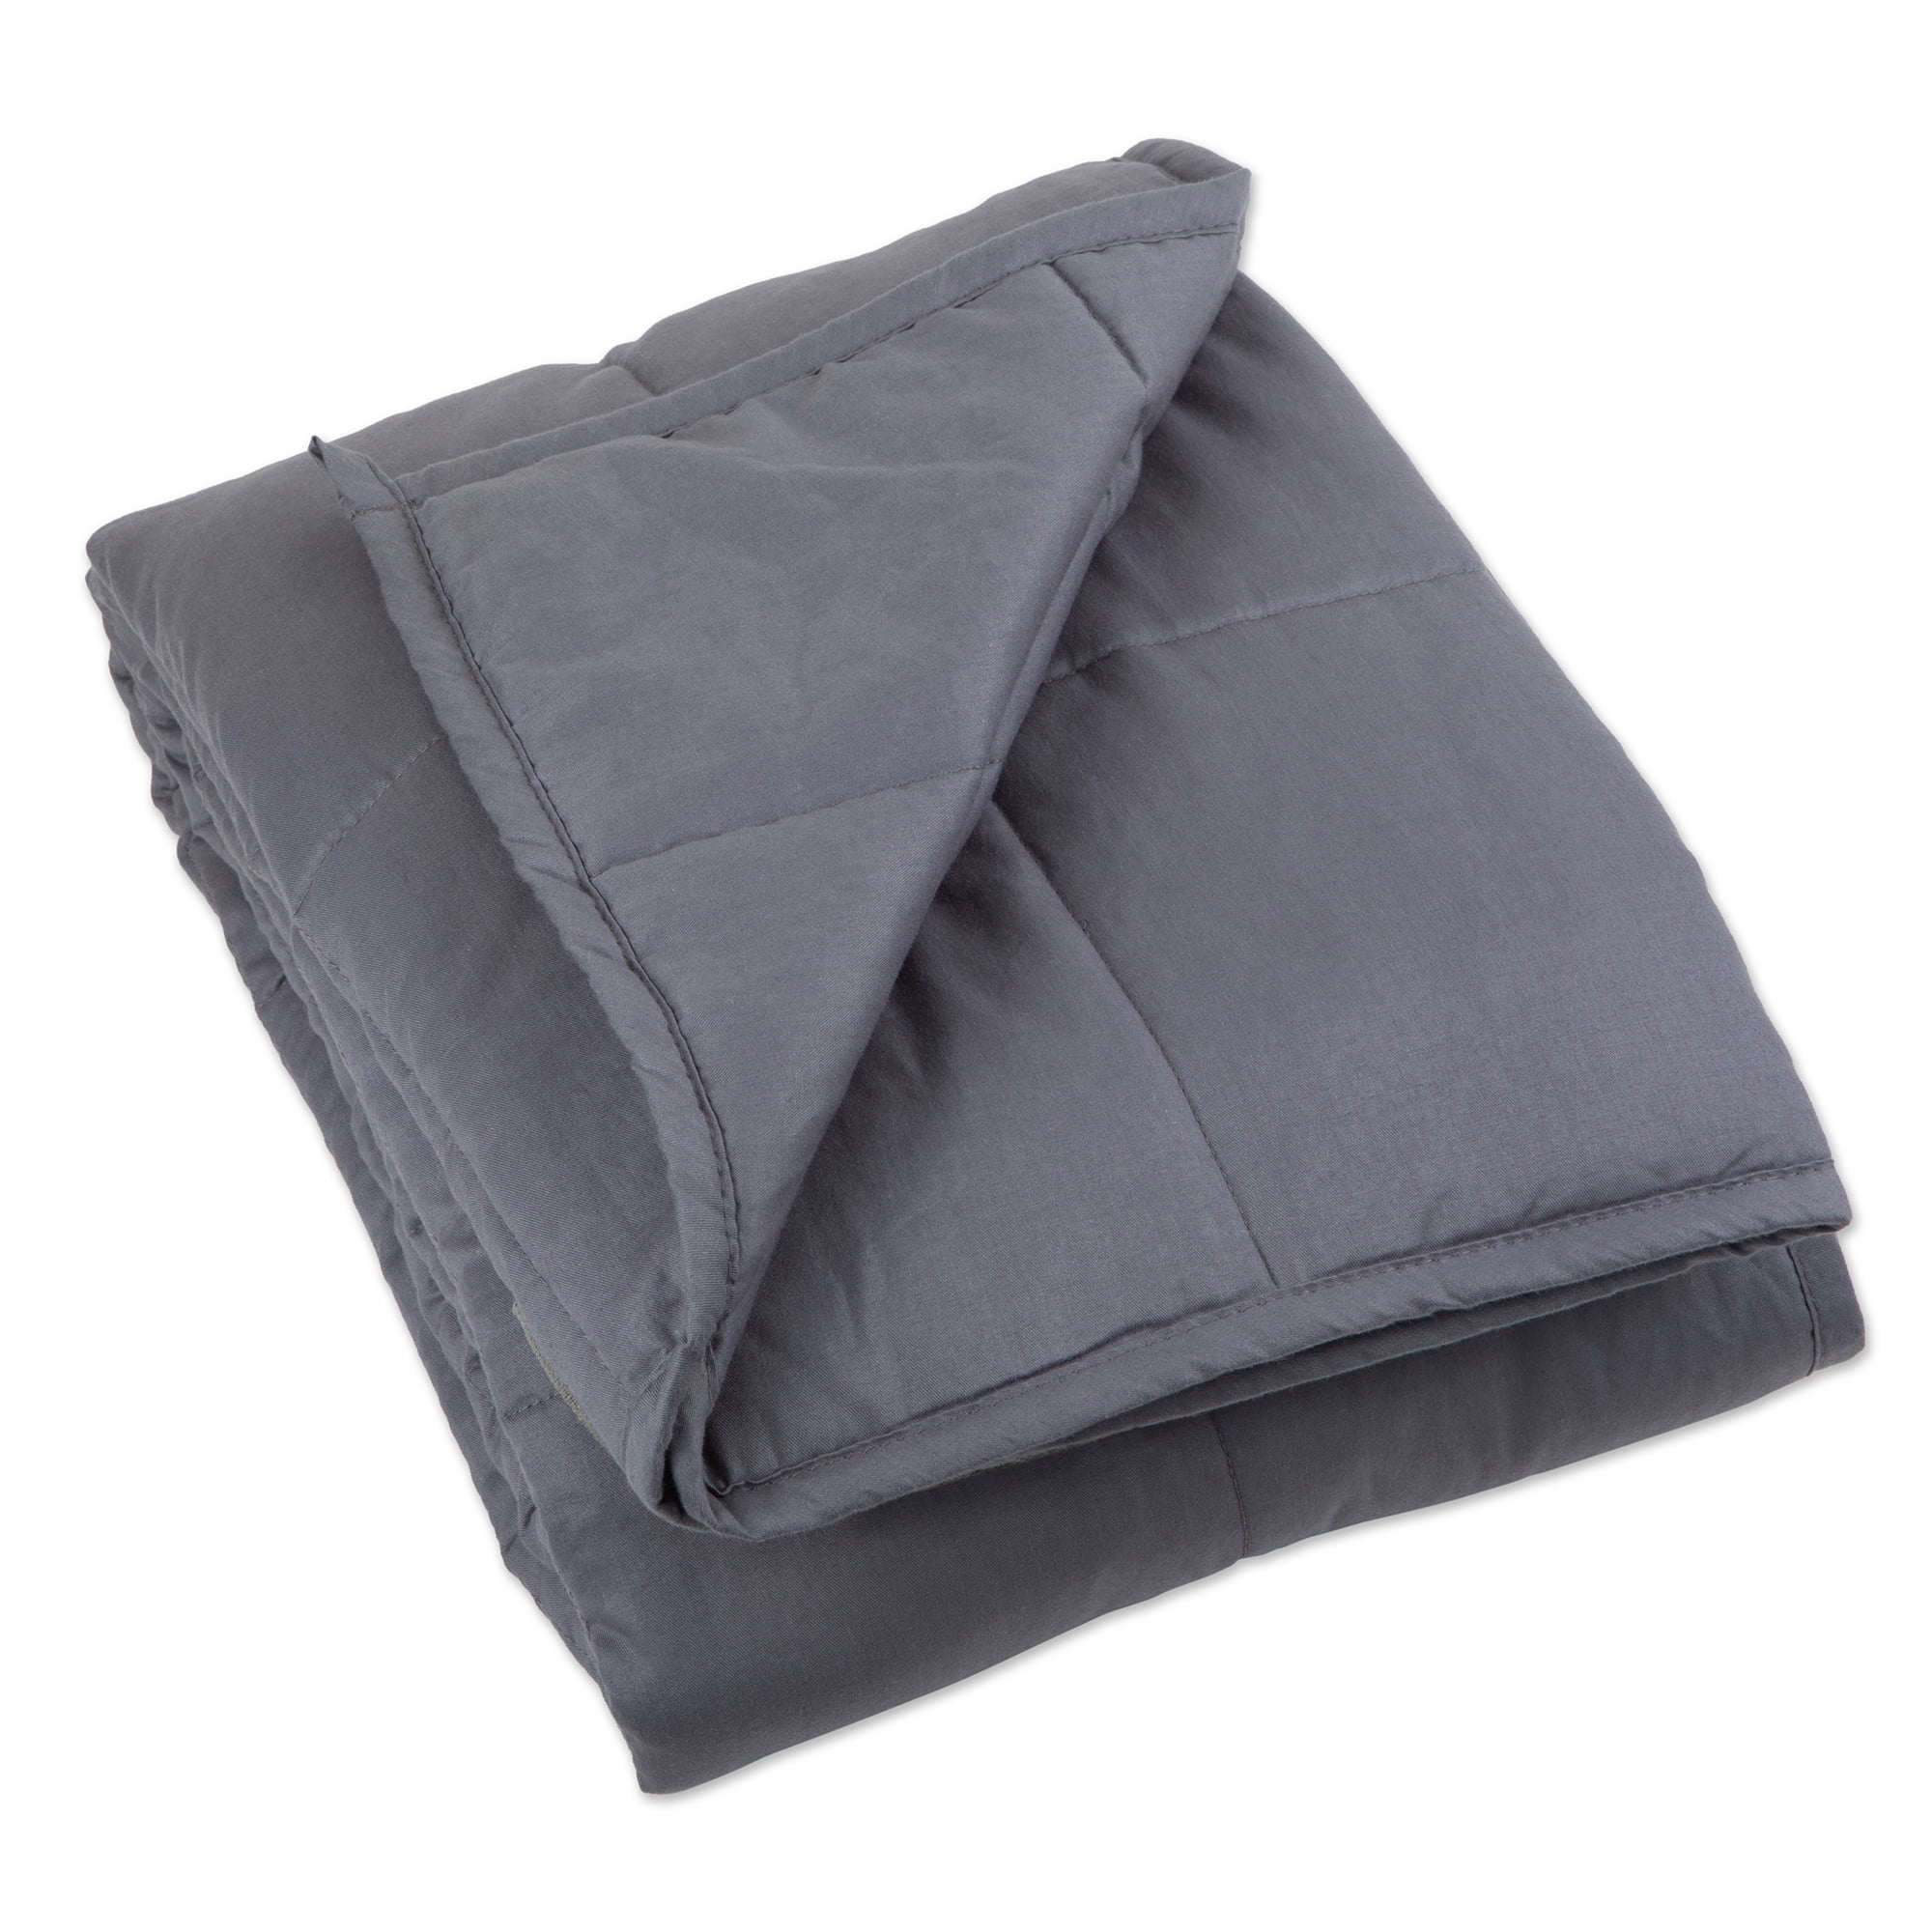 Z02285 15 Lbs Weighted Blanket, Grey - 48 X 72 In.